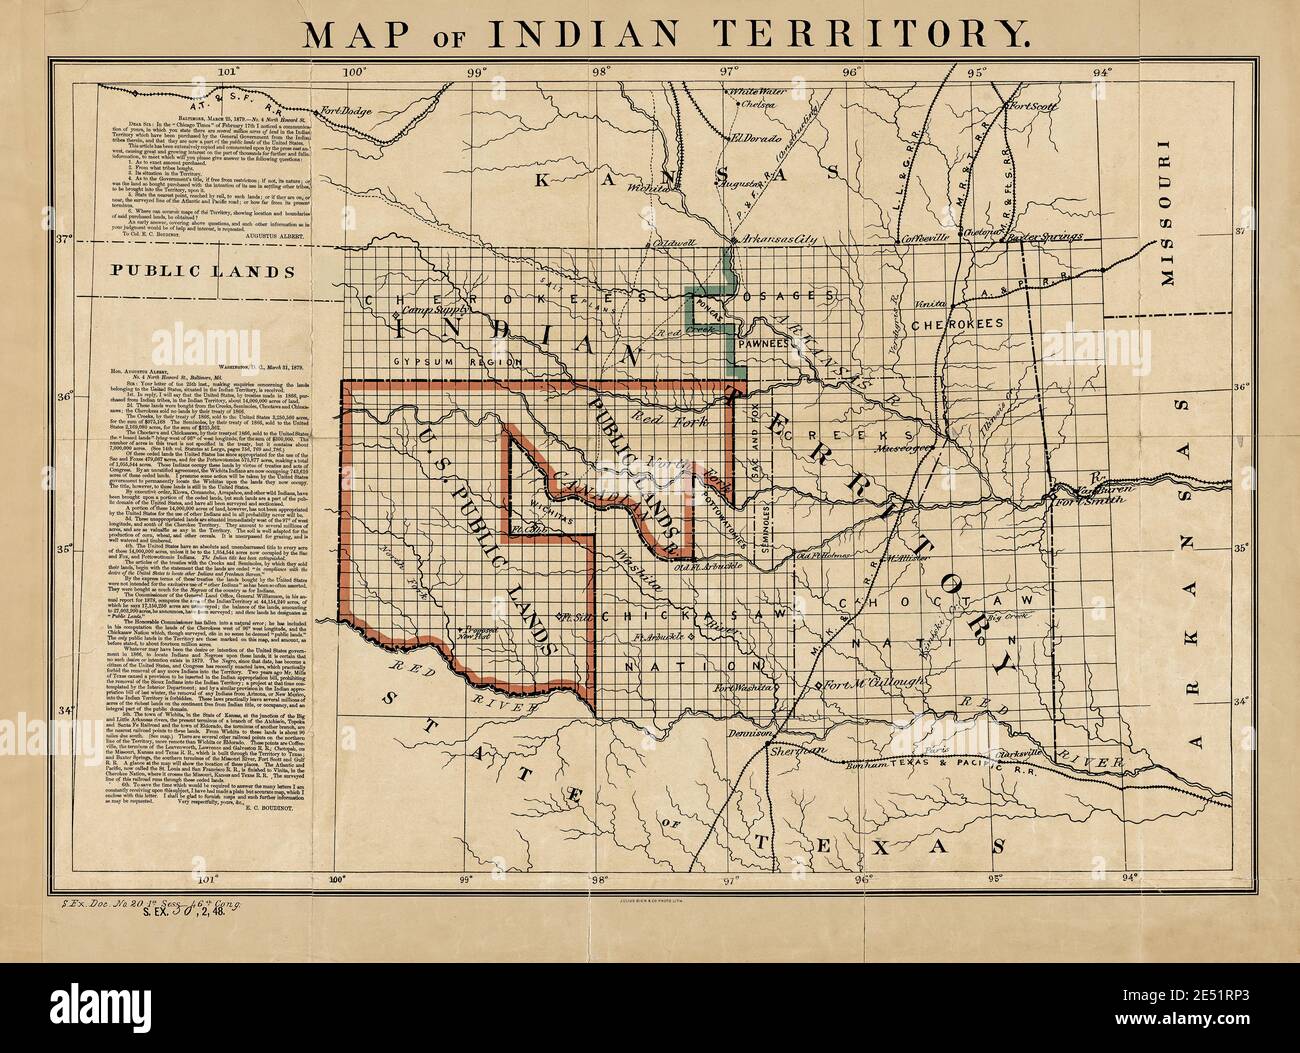 Indian Territory and Public Land Map 1879 with Historic Letters. Original title: 'Map of Indian Territory.' Shows Indian Reservations. This is an enhanced, restored reproduction of an old map showing Indian Reservations and Public Land as of 1876. Note the two letters on the side that discuss the disposition of land in the area that would eventually become Oklahoma. The first letter is from Congressman Augustus Albert with inquiries. The second is a reply from Col. E.C. Boudinot. He describes historical events about the acquisition of the land. He wrote he wanted to 'set the records straight.' Stock Photo